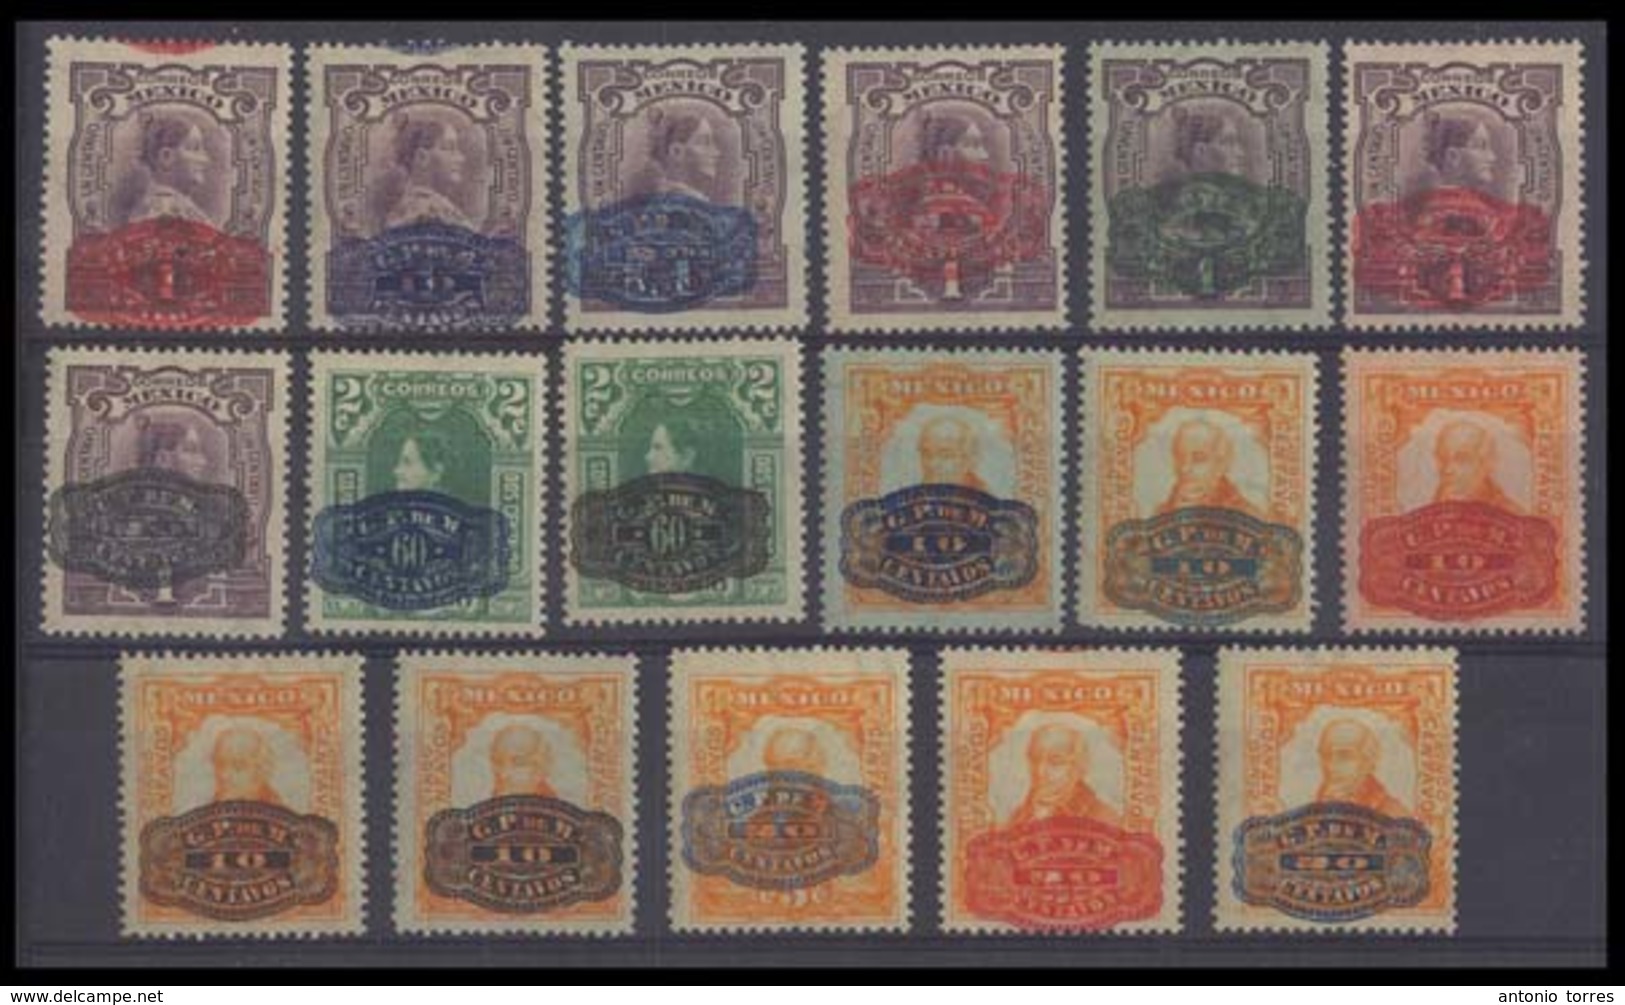 Mexico - XX. 1916. Barrilito Issue. Selection Of 17 Diff Overprinted ESSAY In Diff Colors, Full O.G. Light Hinge. Exceed - Mexico